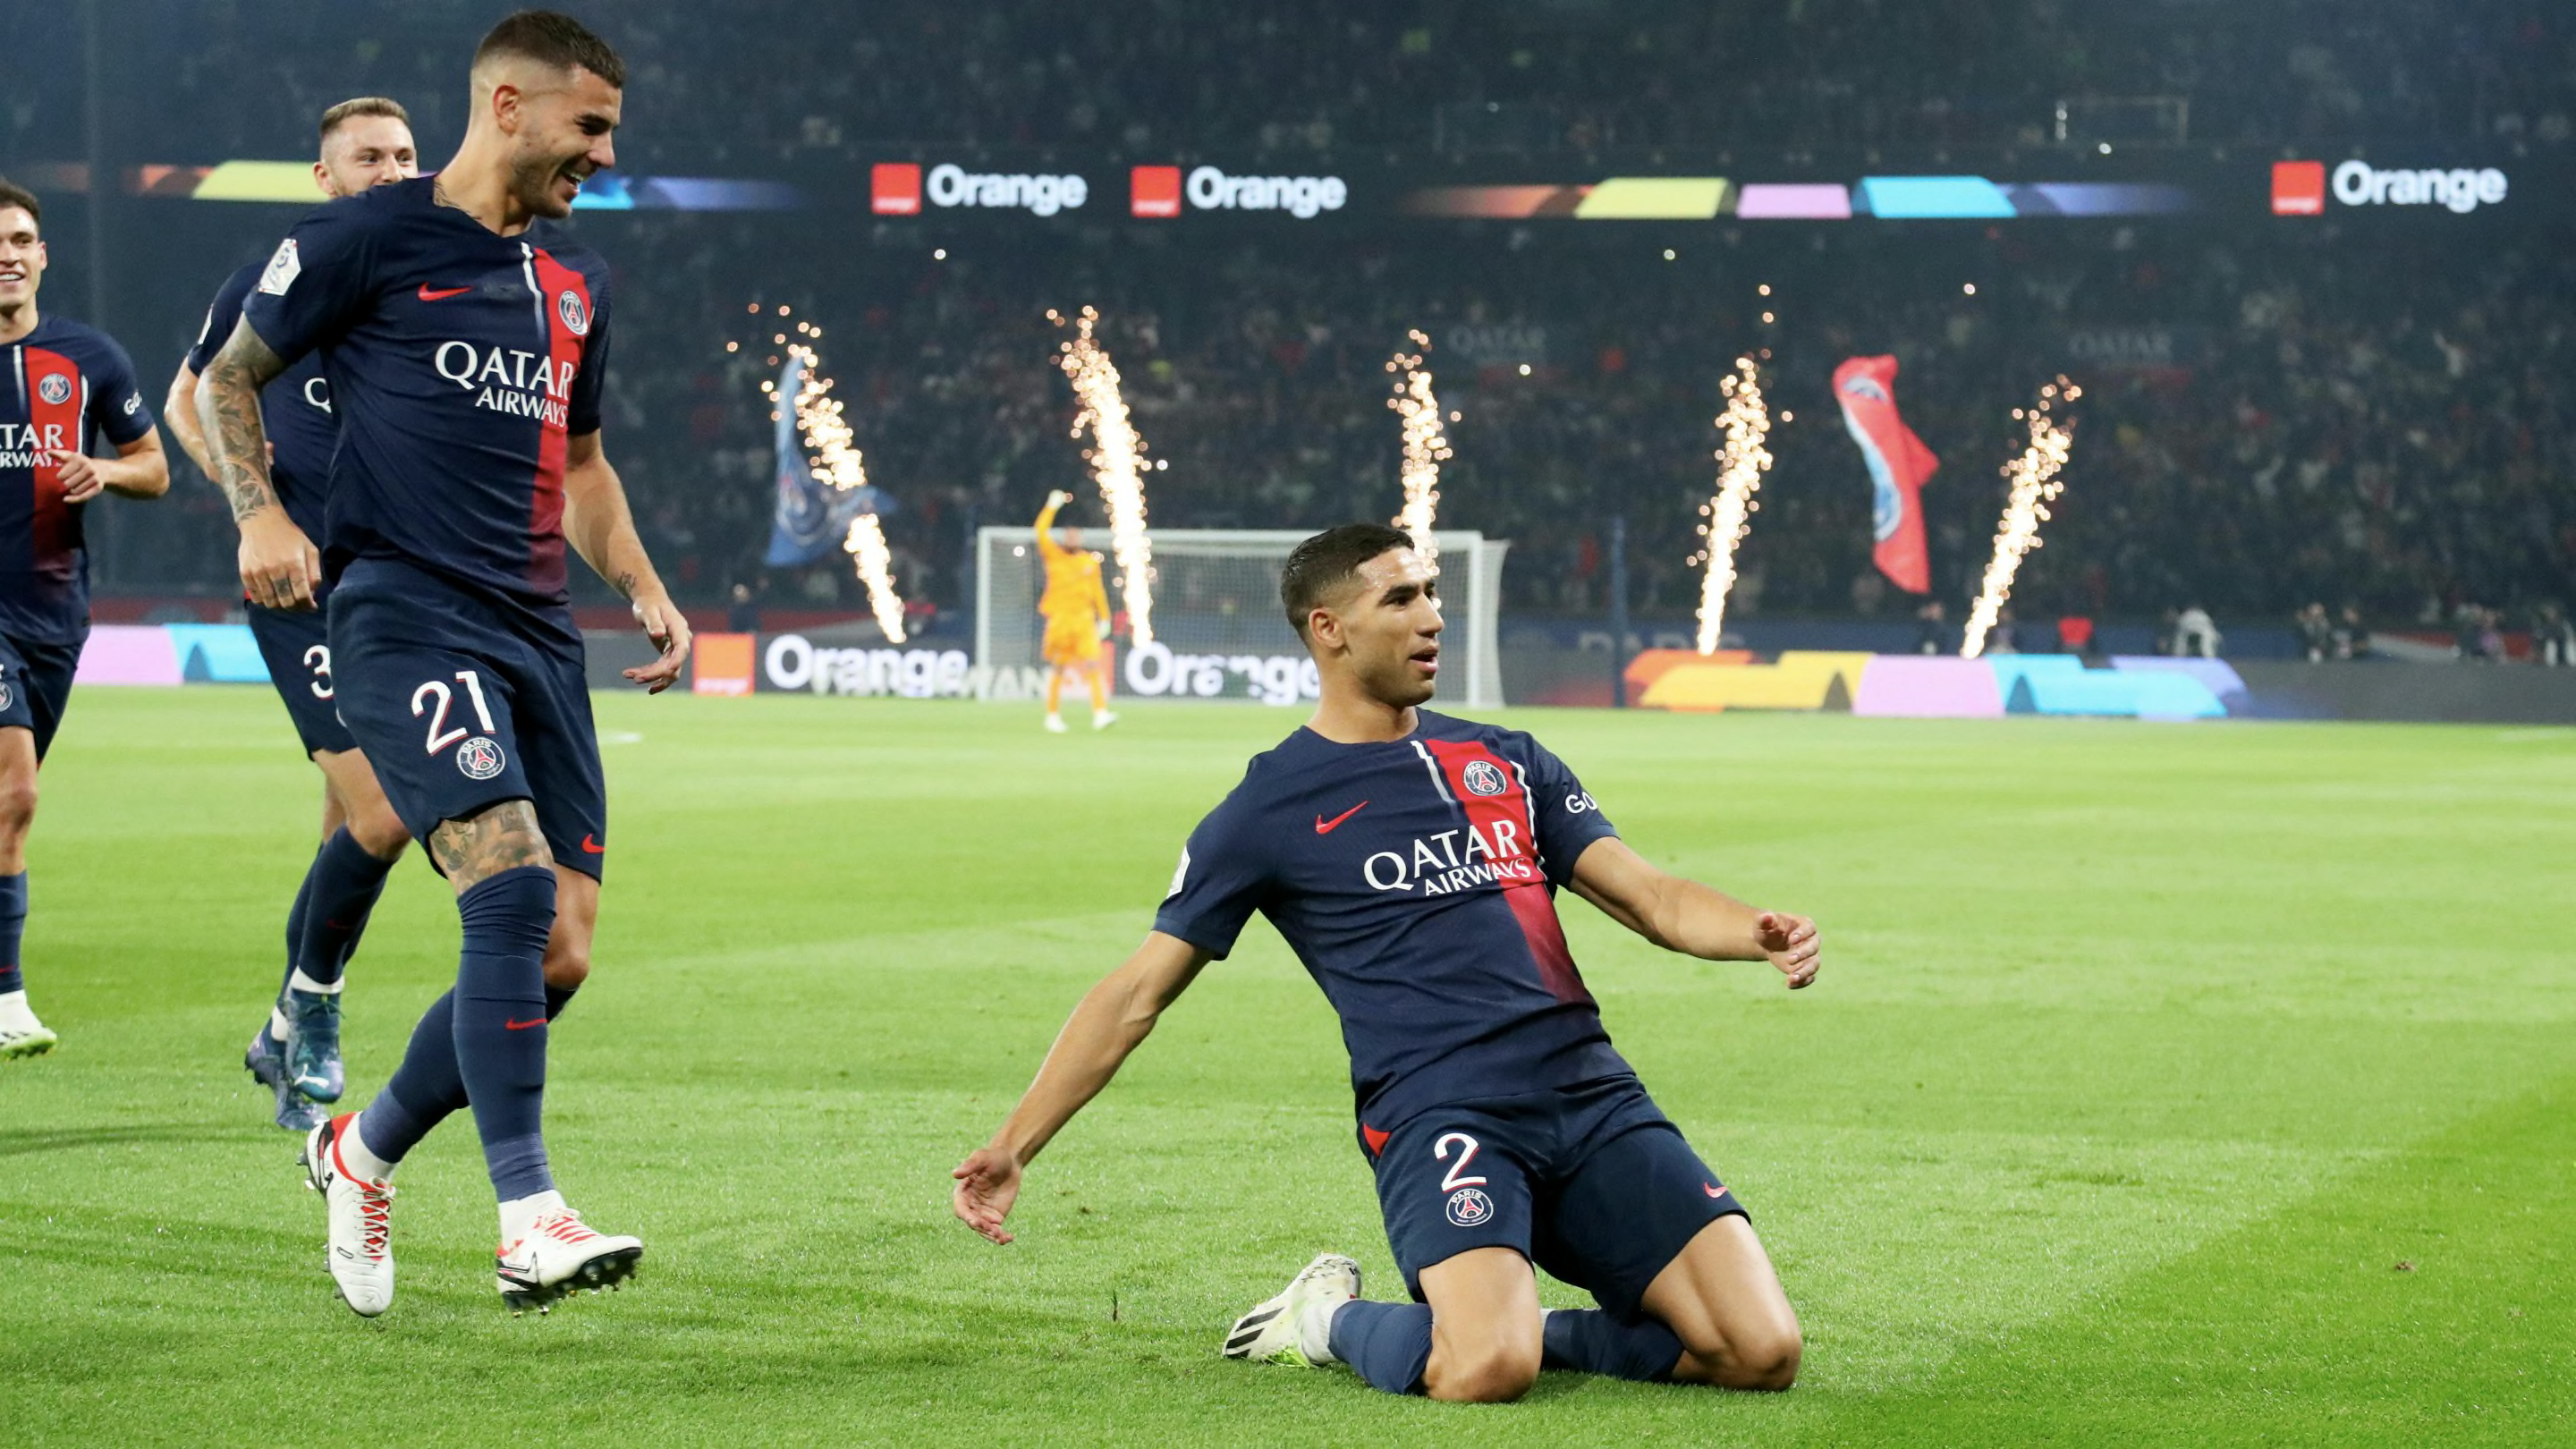 PSG 4-0 Marseille: Player ratings as Mbappe suffers injury in Le Classique win